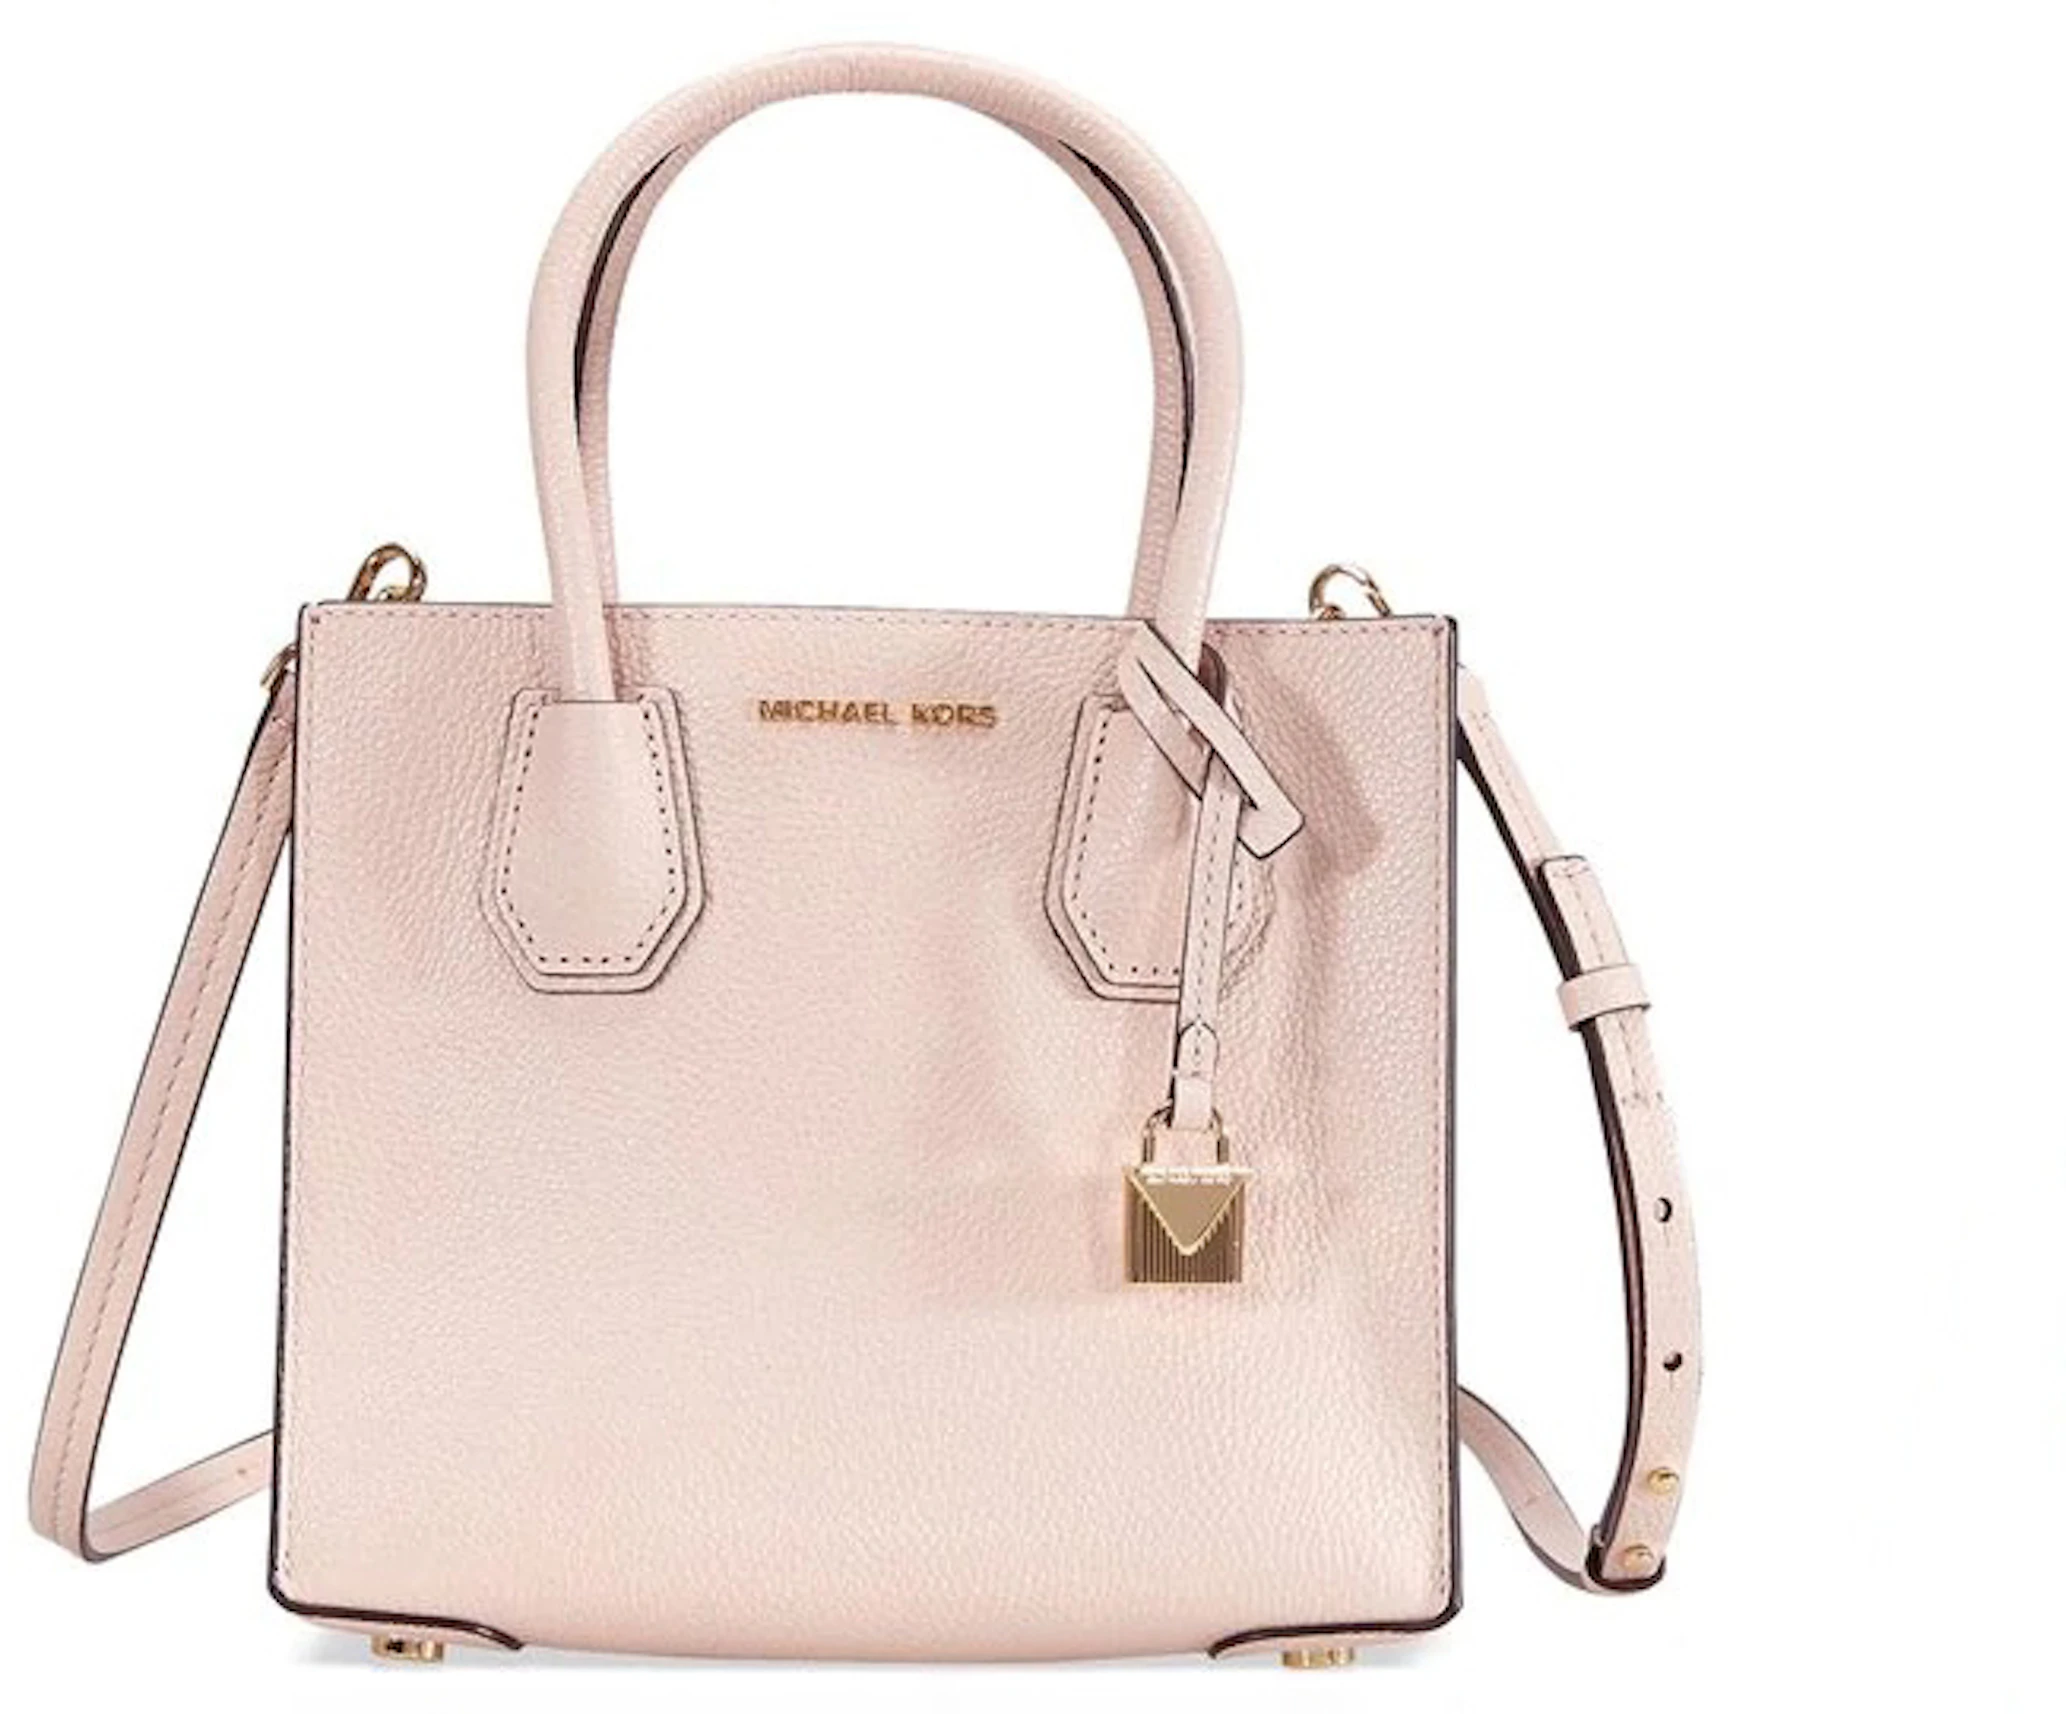 Totes bags Michael Kors - Mercer large soft pink leather tote -  30F6GM9T3L187